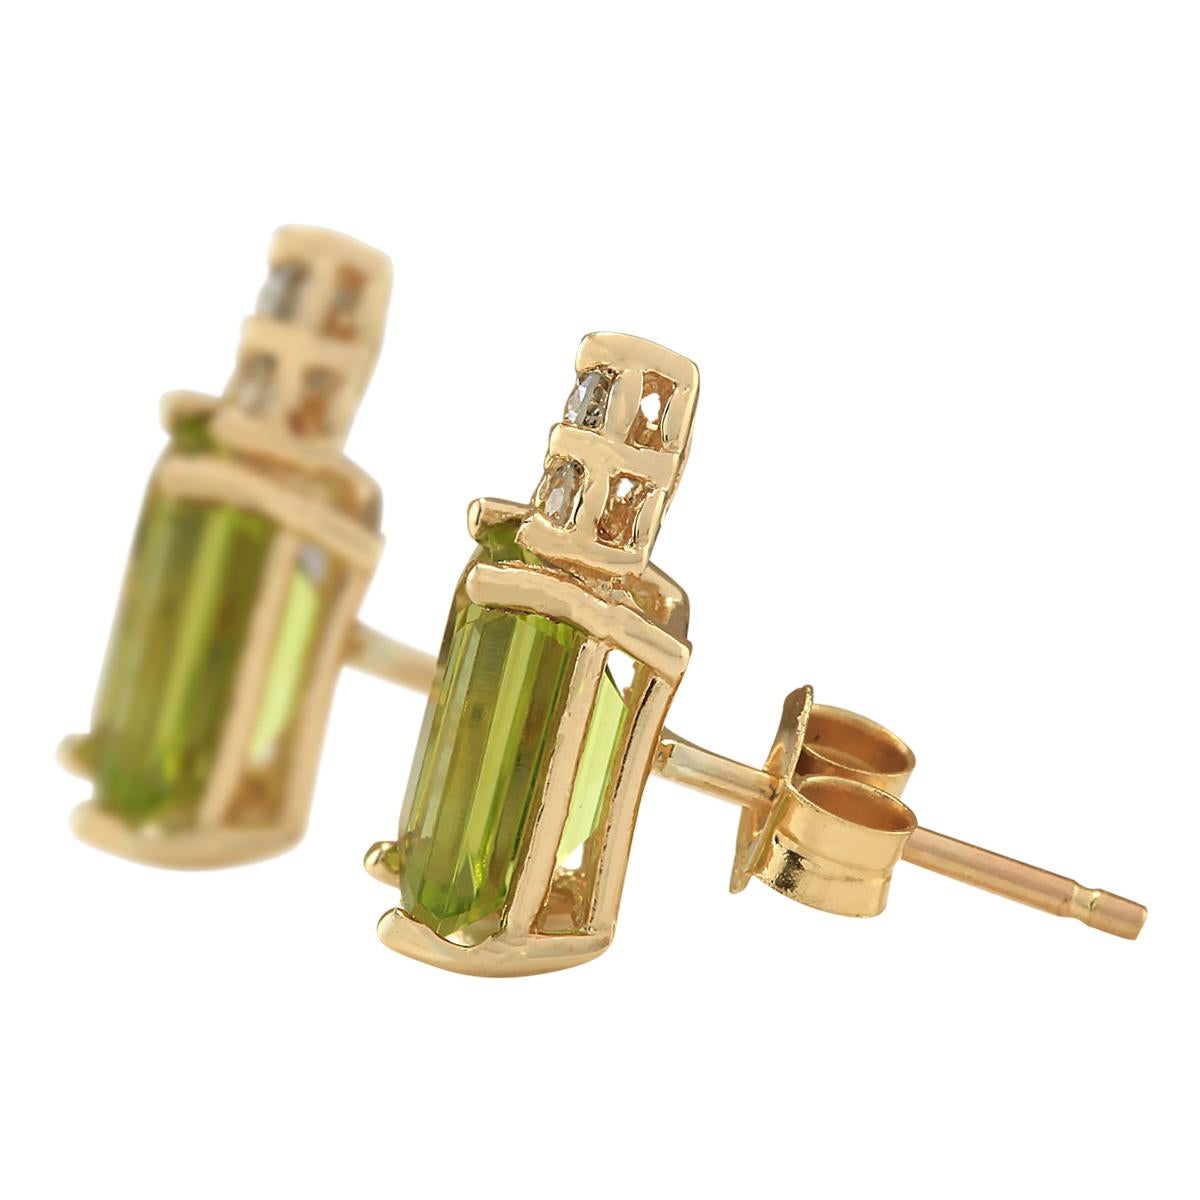 Stamped: 14K Yellow Gold
Total Earrings Weight: 1.2 Grams
Total Natural Peridot Weight is 2.50 Carat (Measures: 7.00x5.00 mm)
Color: Green
Total Natural Diamond Weight is 0.15 Carat
Color: F-G, Clarity: VS2-SI1
Face Measures: 11.95x5.00 mm
Sku: